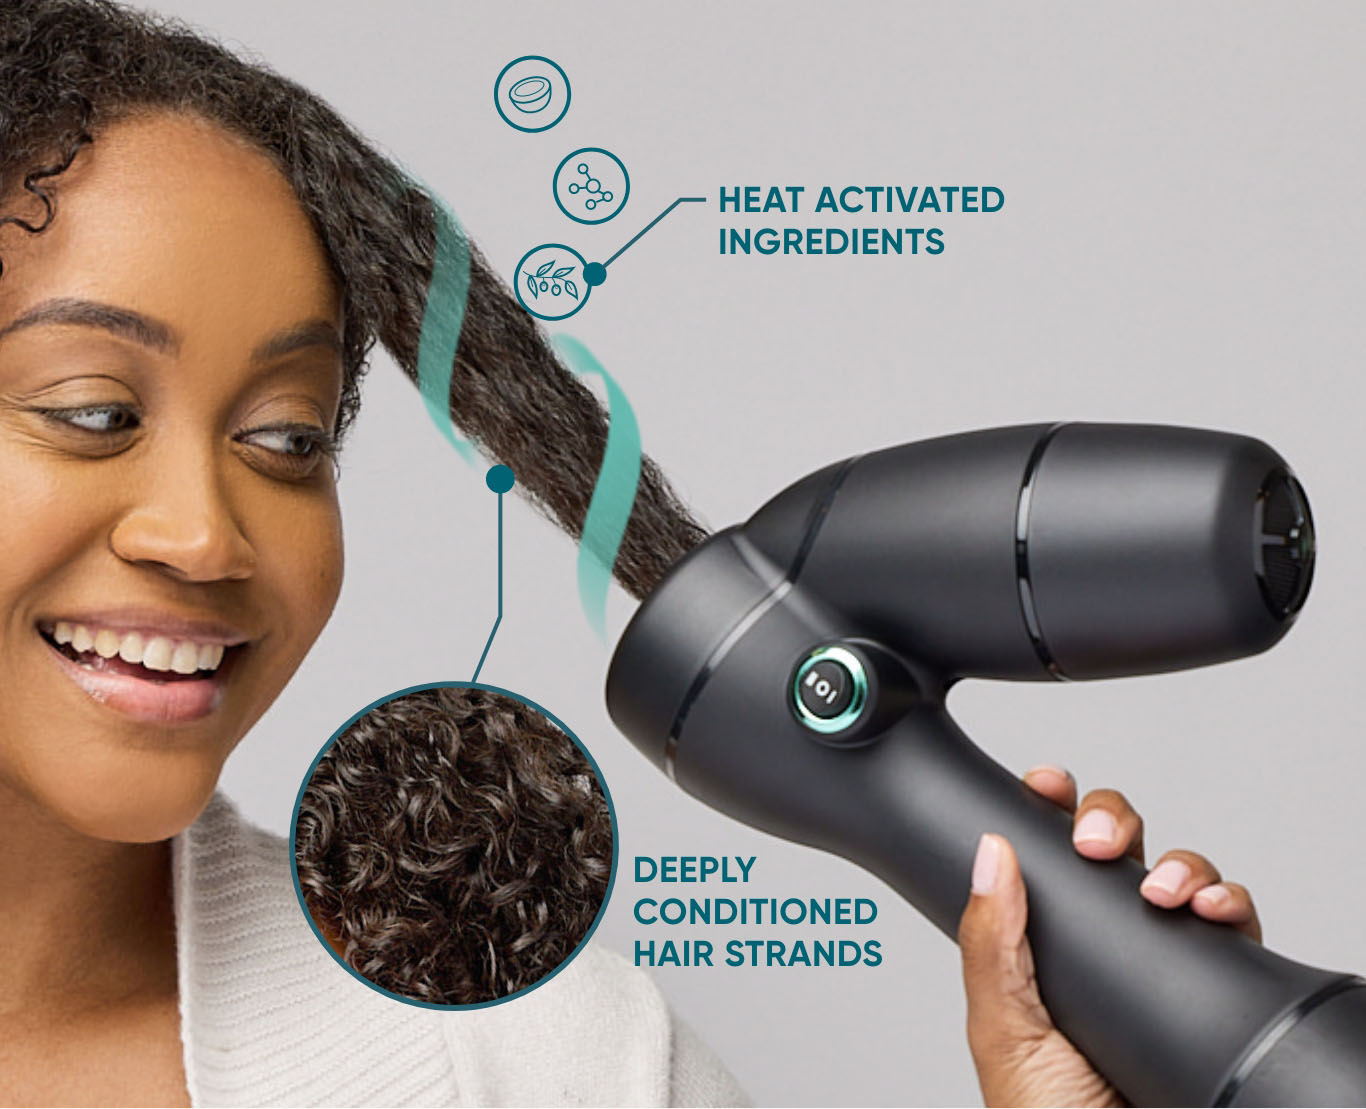 Woman using RevAir device as closeup of hair shows deeply conditioned hair strands, and icons represent heat-activated ingredients